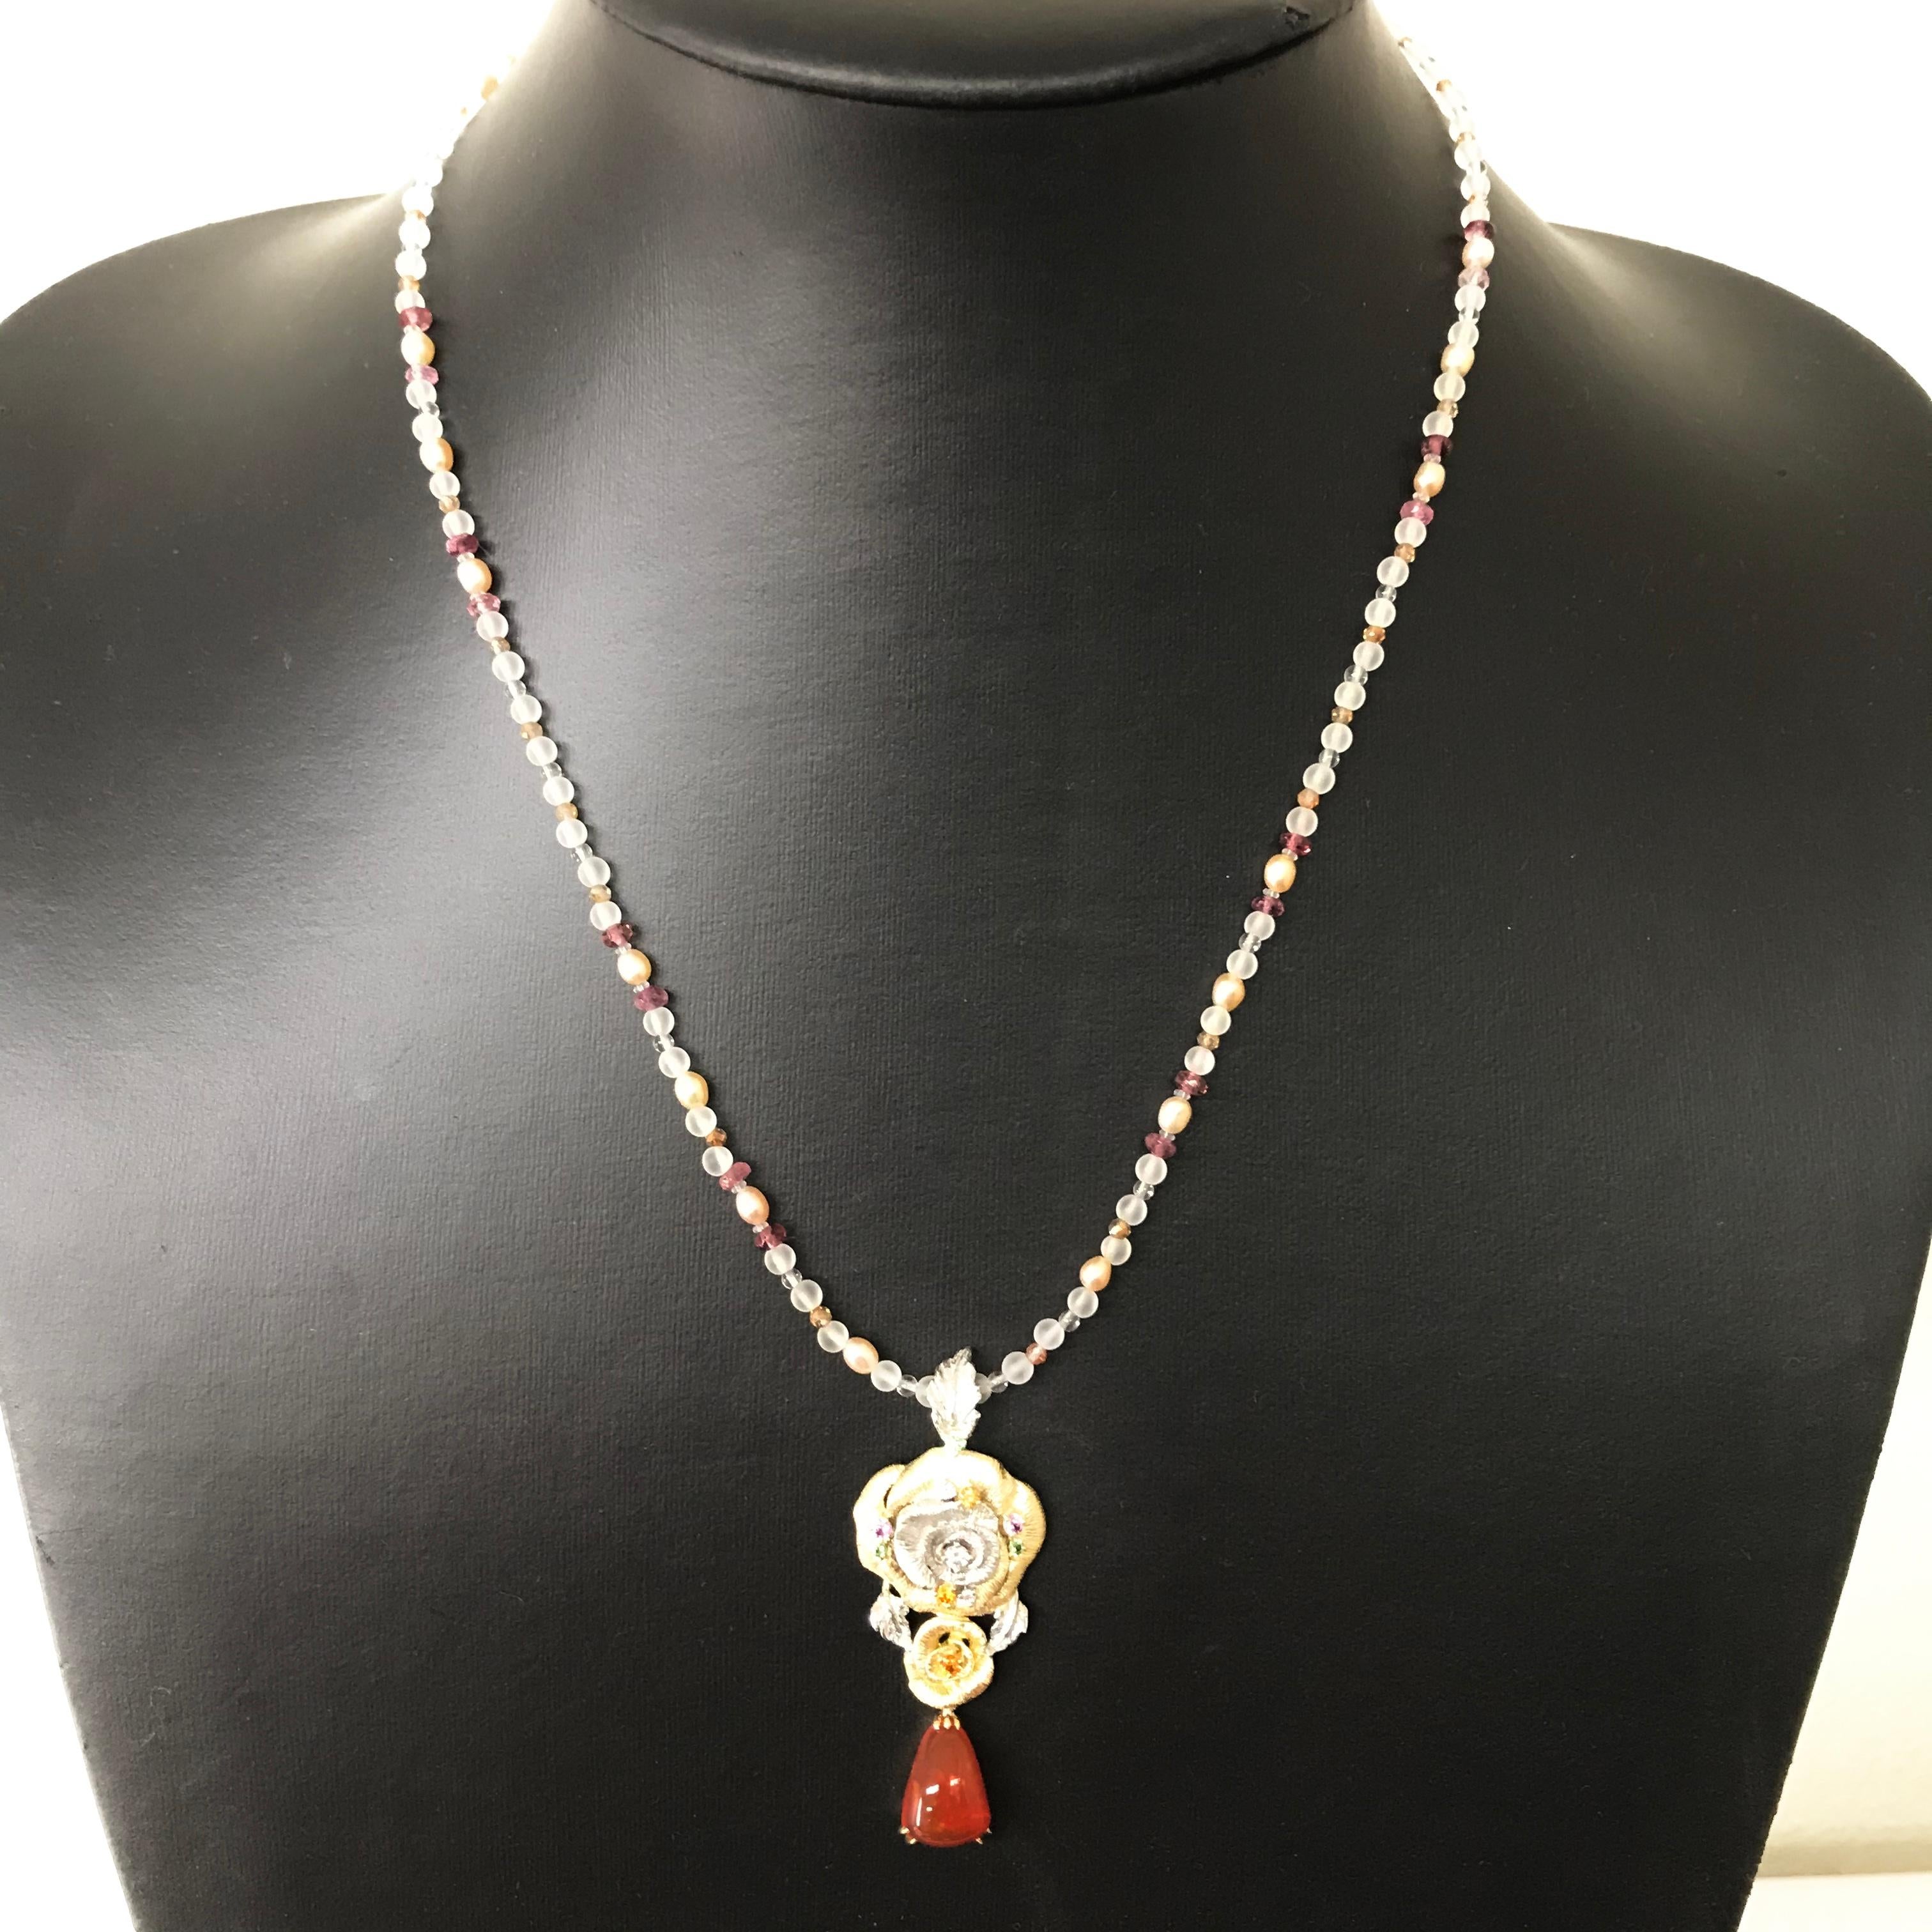 All buyers outside of Japan will receive -10% tax exemption from the list price. 
Please inquire for details.

[Detailed Information]

Pendant : K18Yellow Gold /Platinum 900
FIRE OPAL 3.02c / GARNET(GREEN & ORANGE) 0.22ct 
PINK SAPPHIRE 0.10ct /